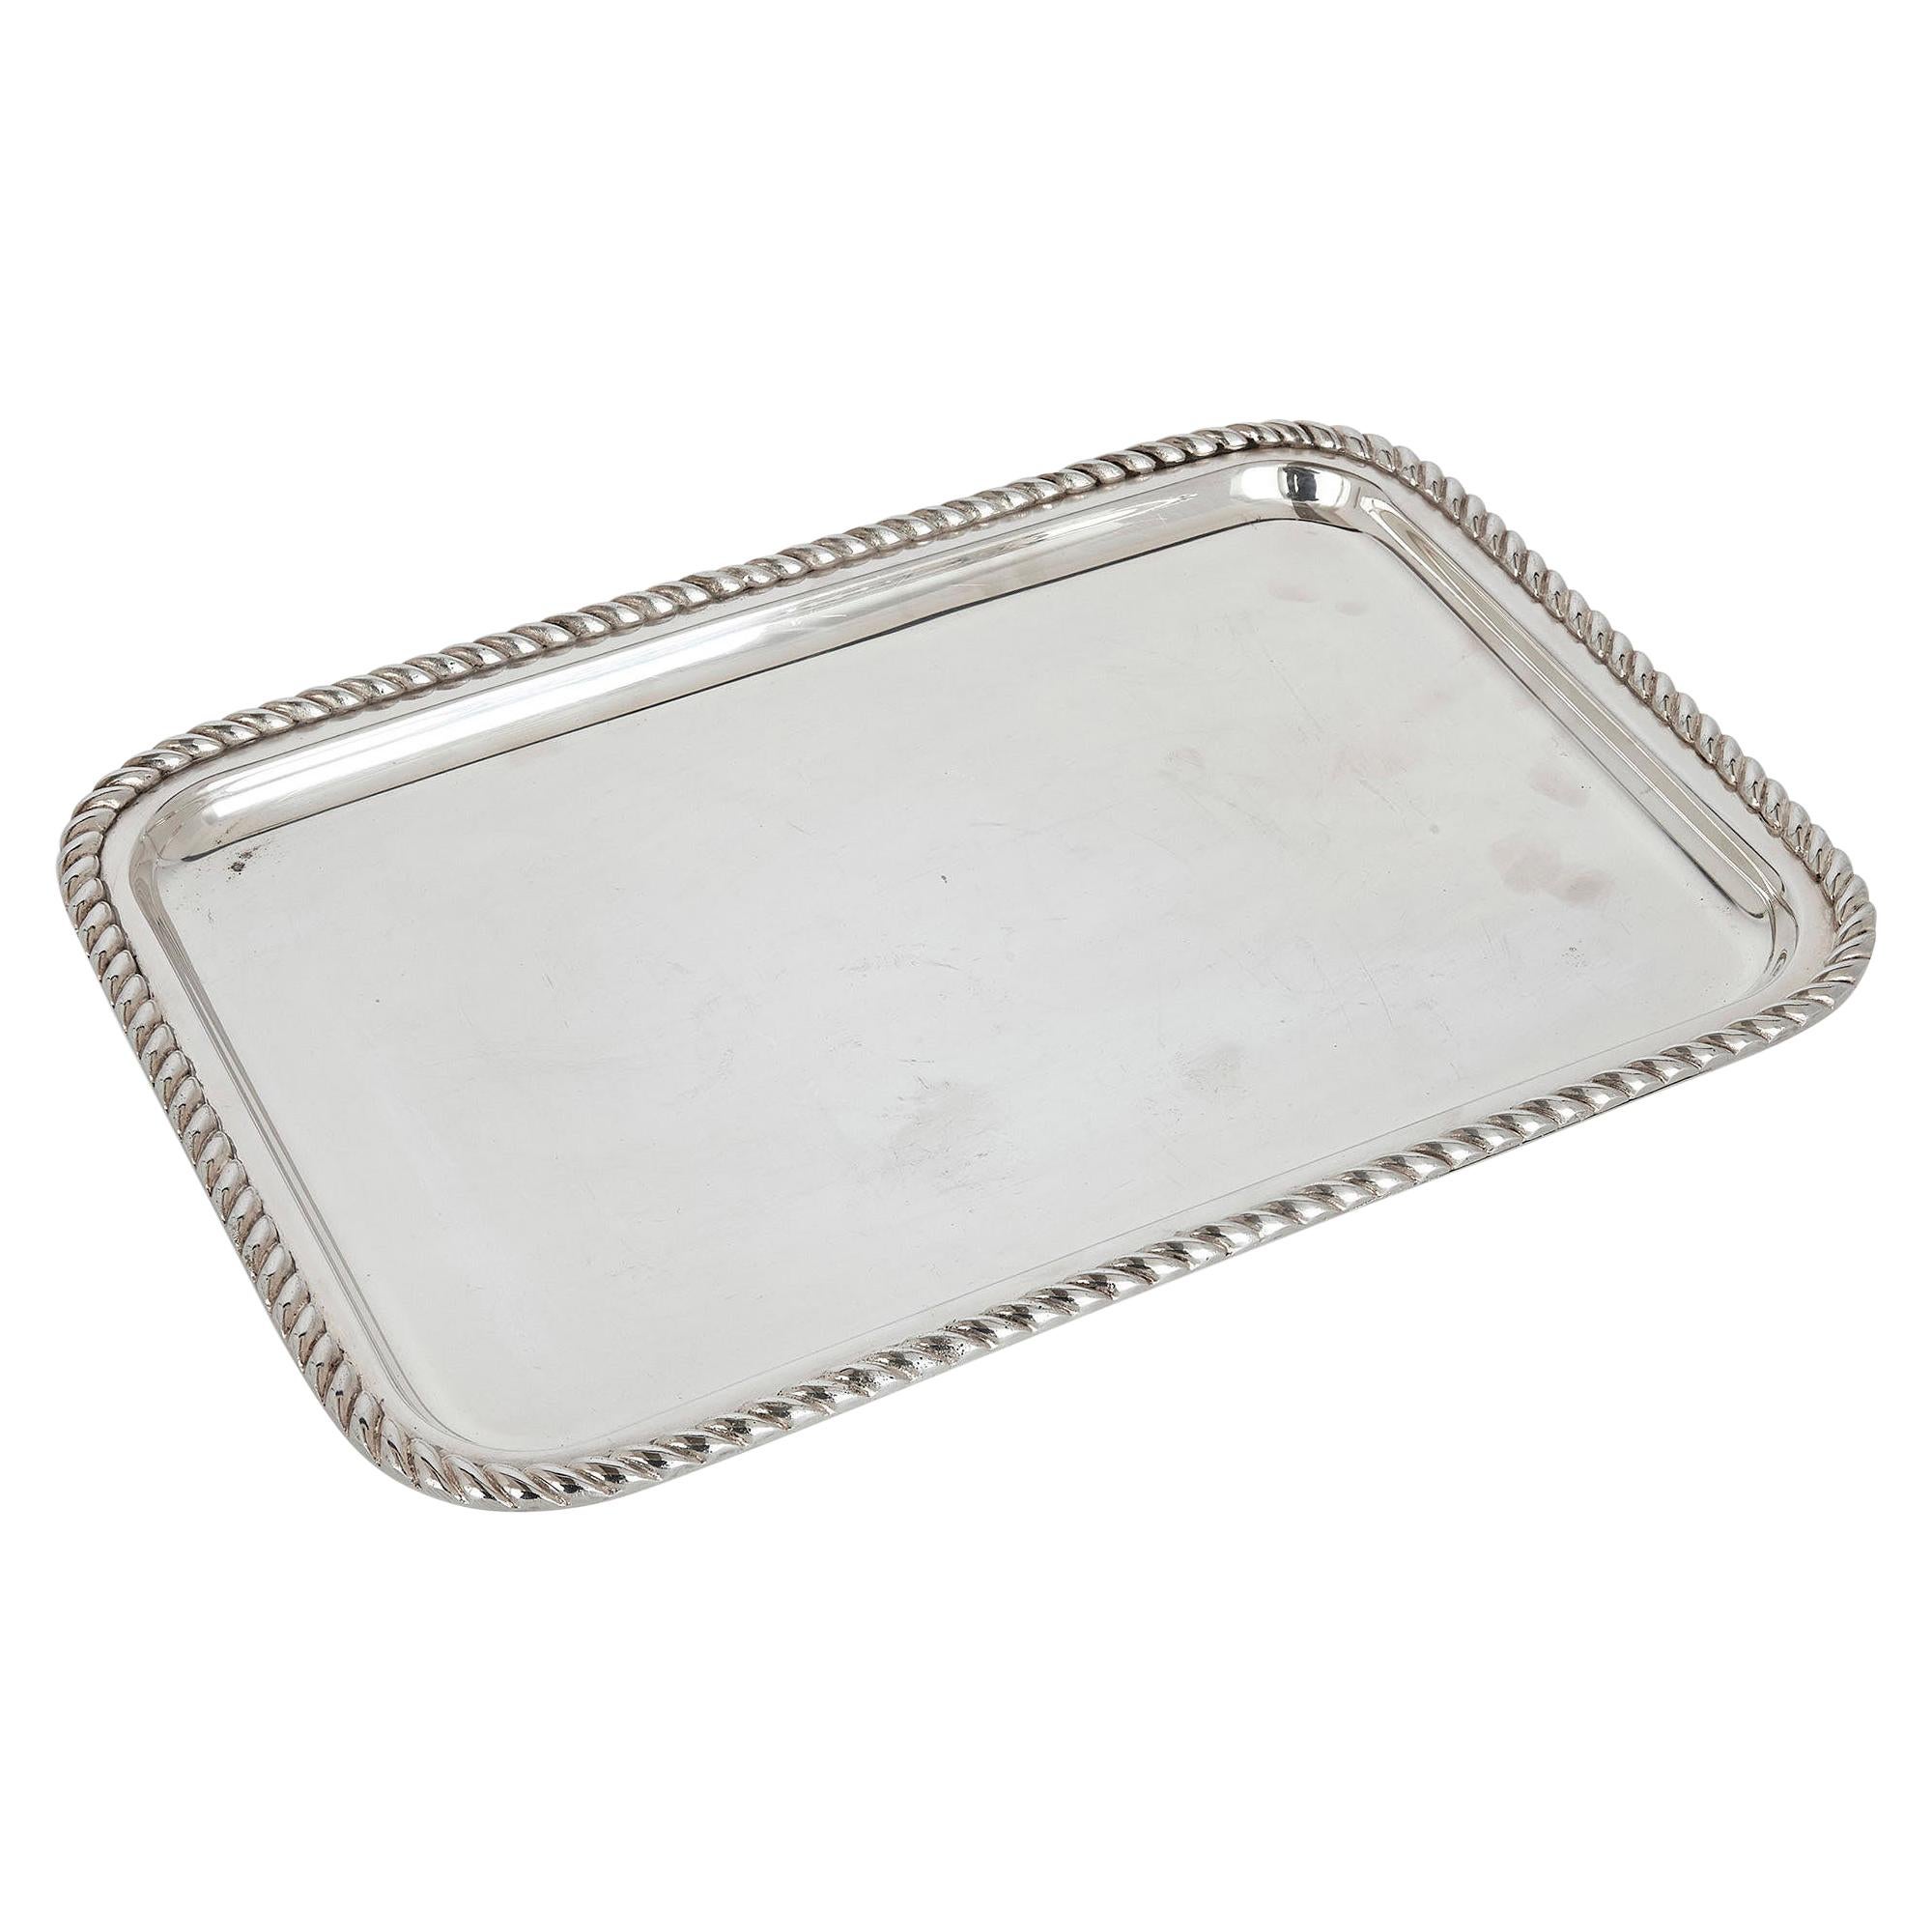 Fine Silver-Plate Tray by Lebanese Firm Habis For Sale